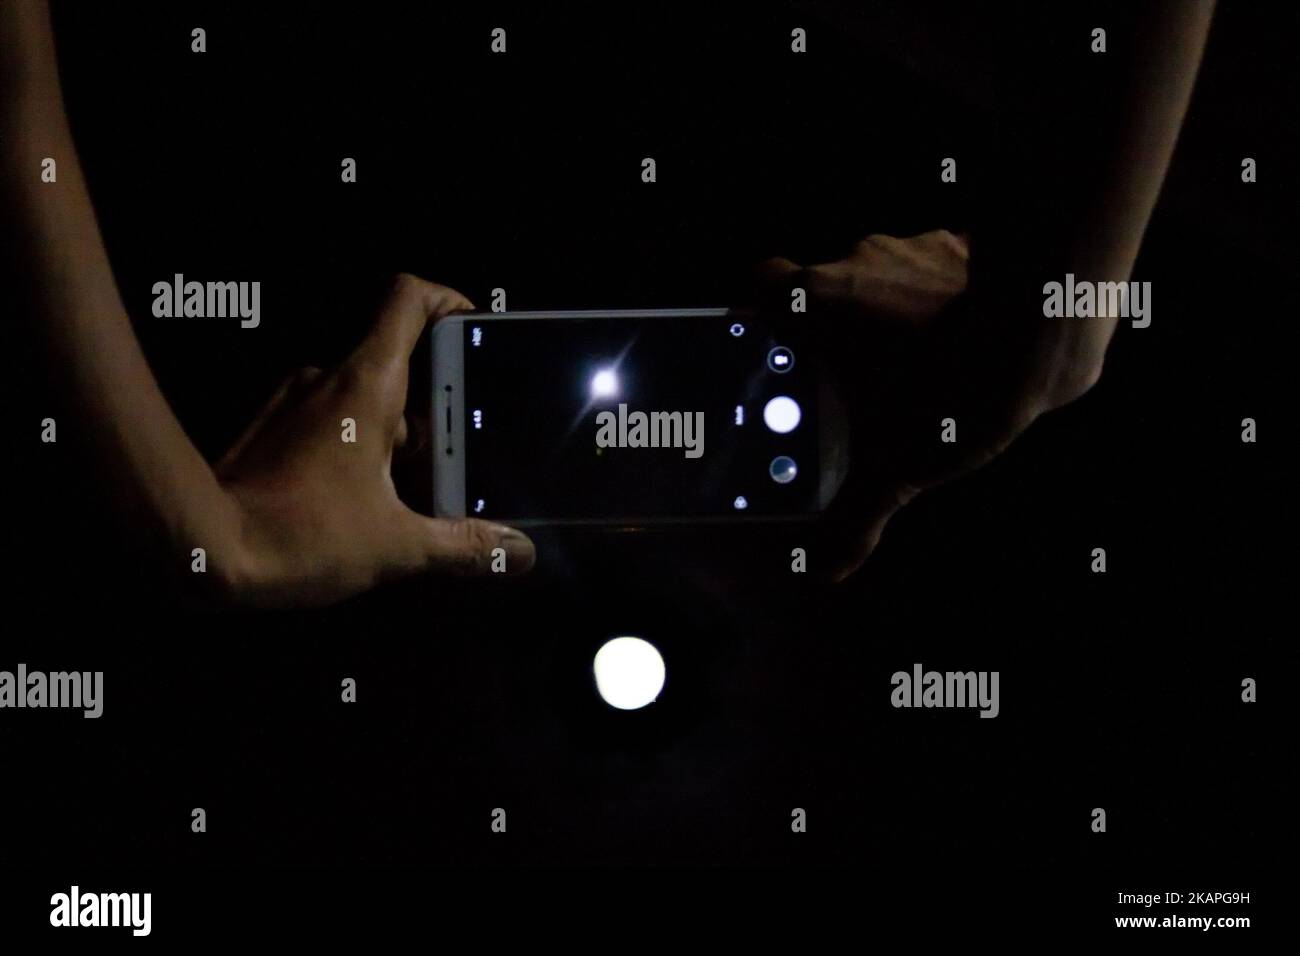 Peoples try to capturing pictures of partial lunar eclipse phenomenon by mobile phone camera at Cibitung District, West Java on Monday, August 7, 2017. Tonight, the moon experiences a partial eclipse phenomenon with a duration of 5 hours 4.9 minutes, which begins on Monday, August 7 at 10:48 pm local time till Tuesday, August 8 at 3:52 am local time, while the peak of a partial lunar eclipse occurs at 1:20 local time. According to information published by the Indonesian Meteorology, Climatology and Geophysics Agency, the phenomenon of partial lunar eclipses today is the 61st member of 80 membe Stock Photo